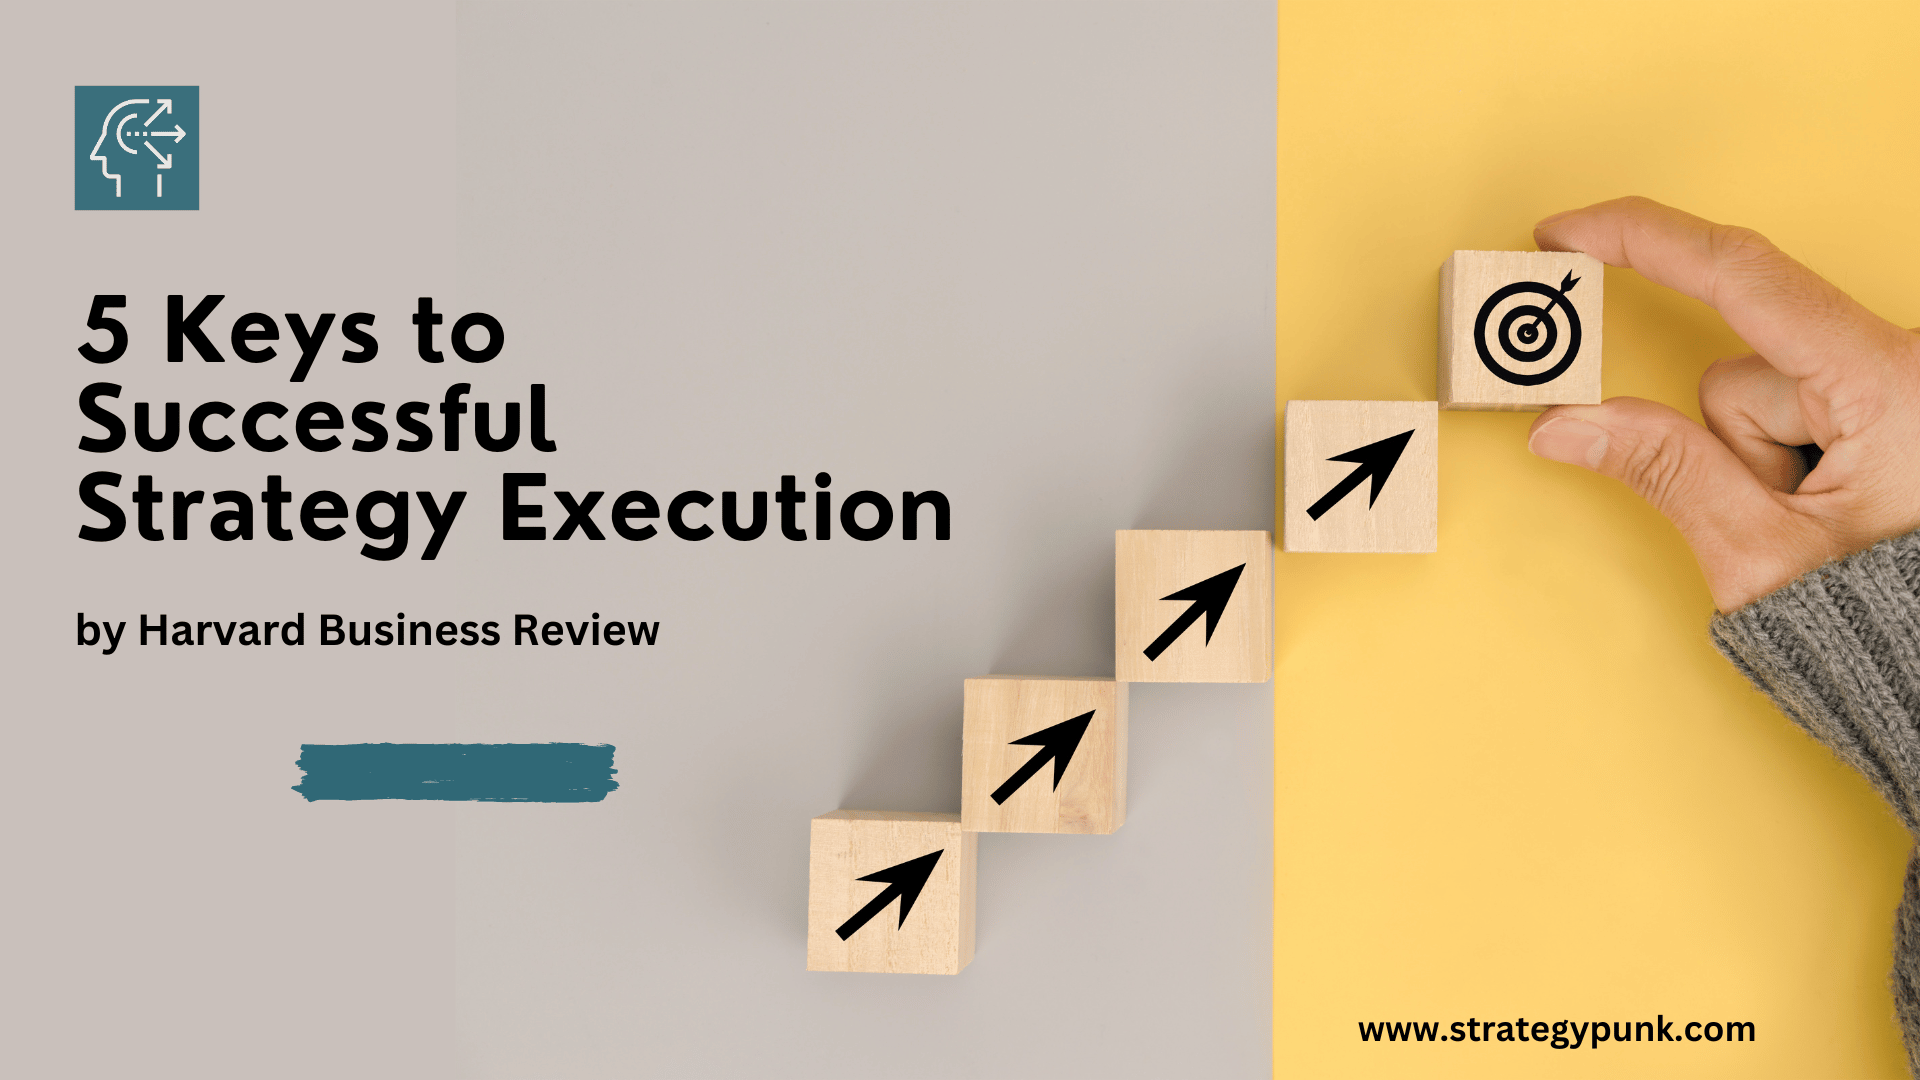 5 Keys to Successful Strategy Execution from Harvard Business Review